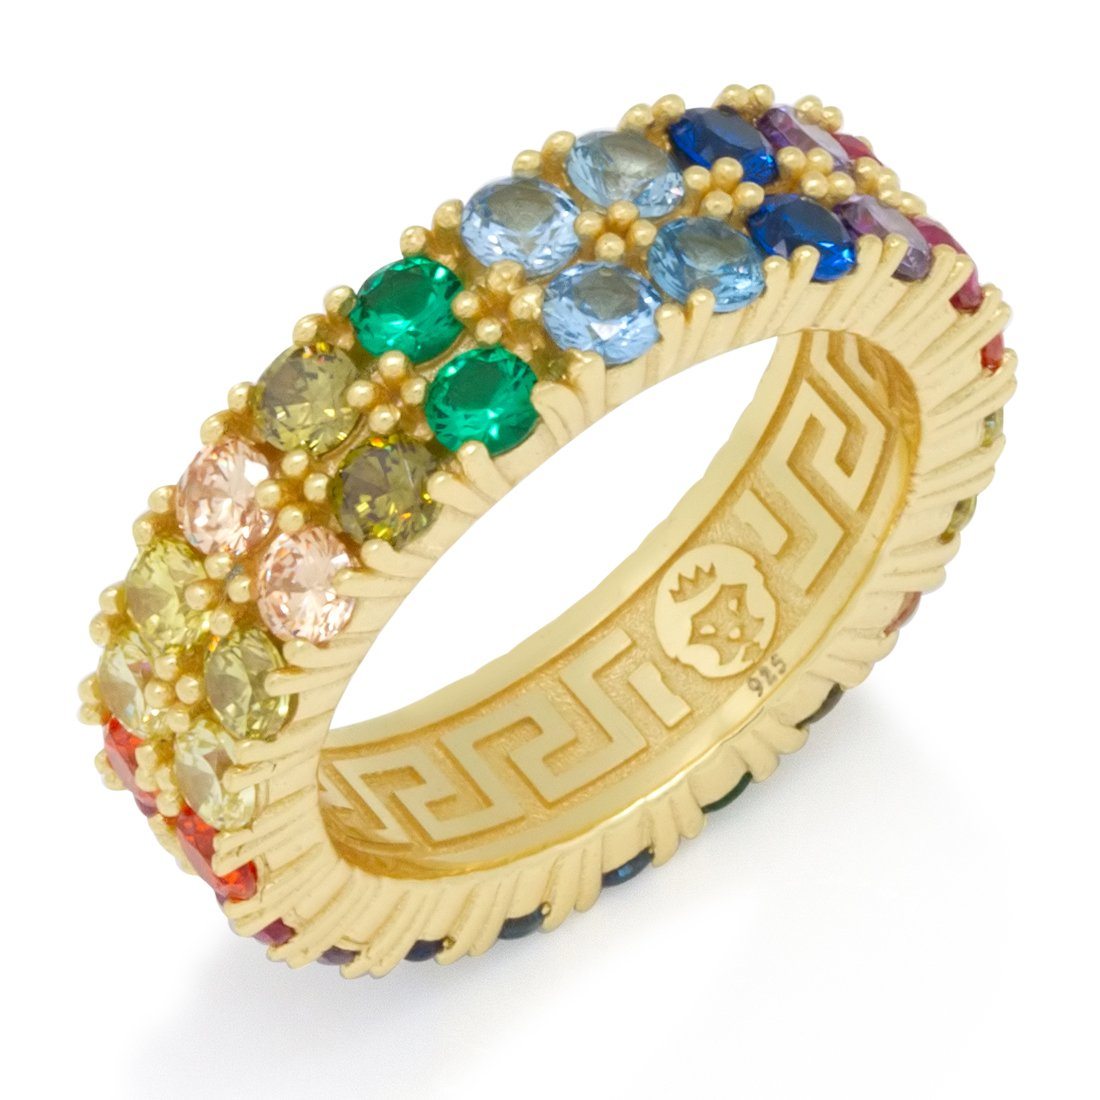 The 14K Gold Round CZ Double Row Spectrum Ring